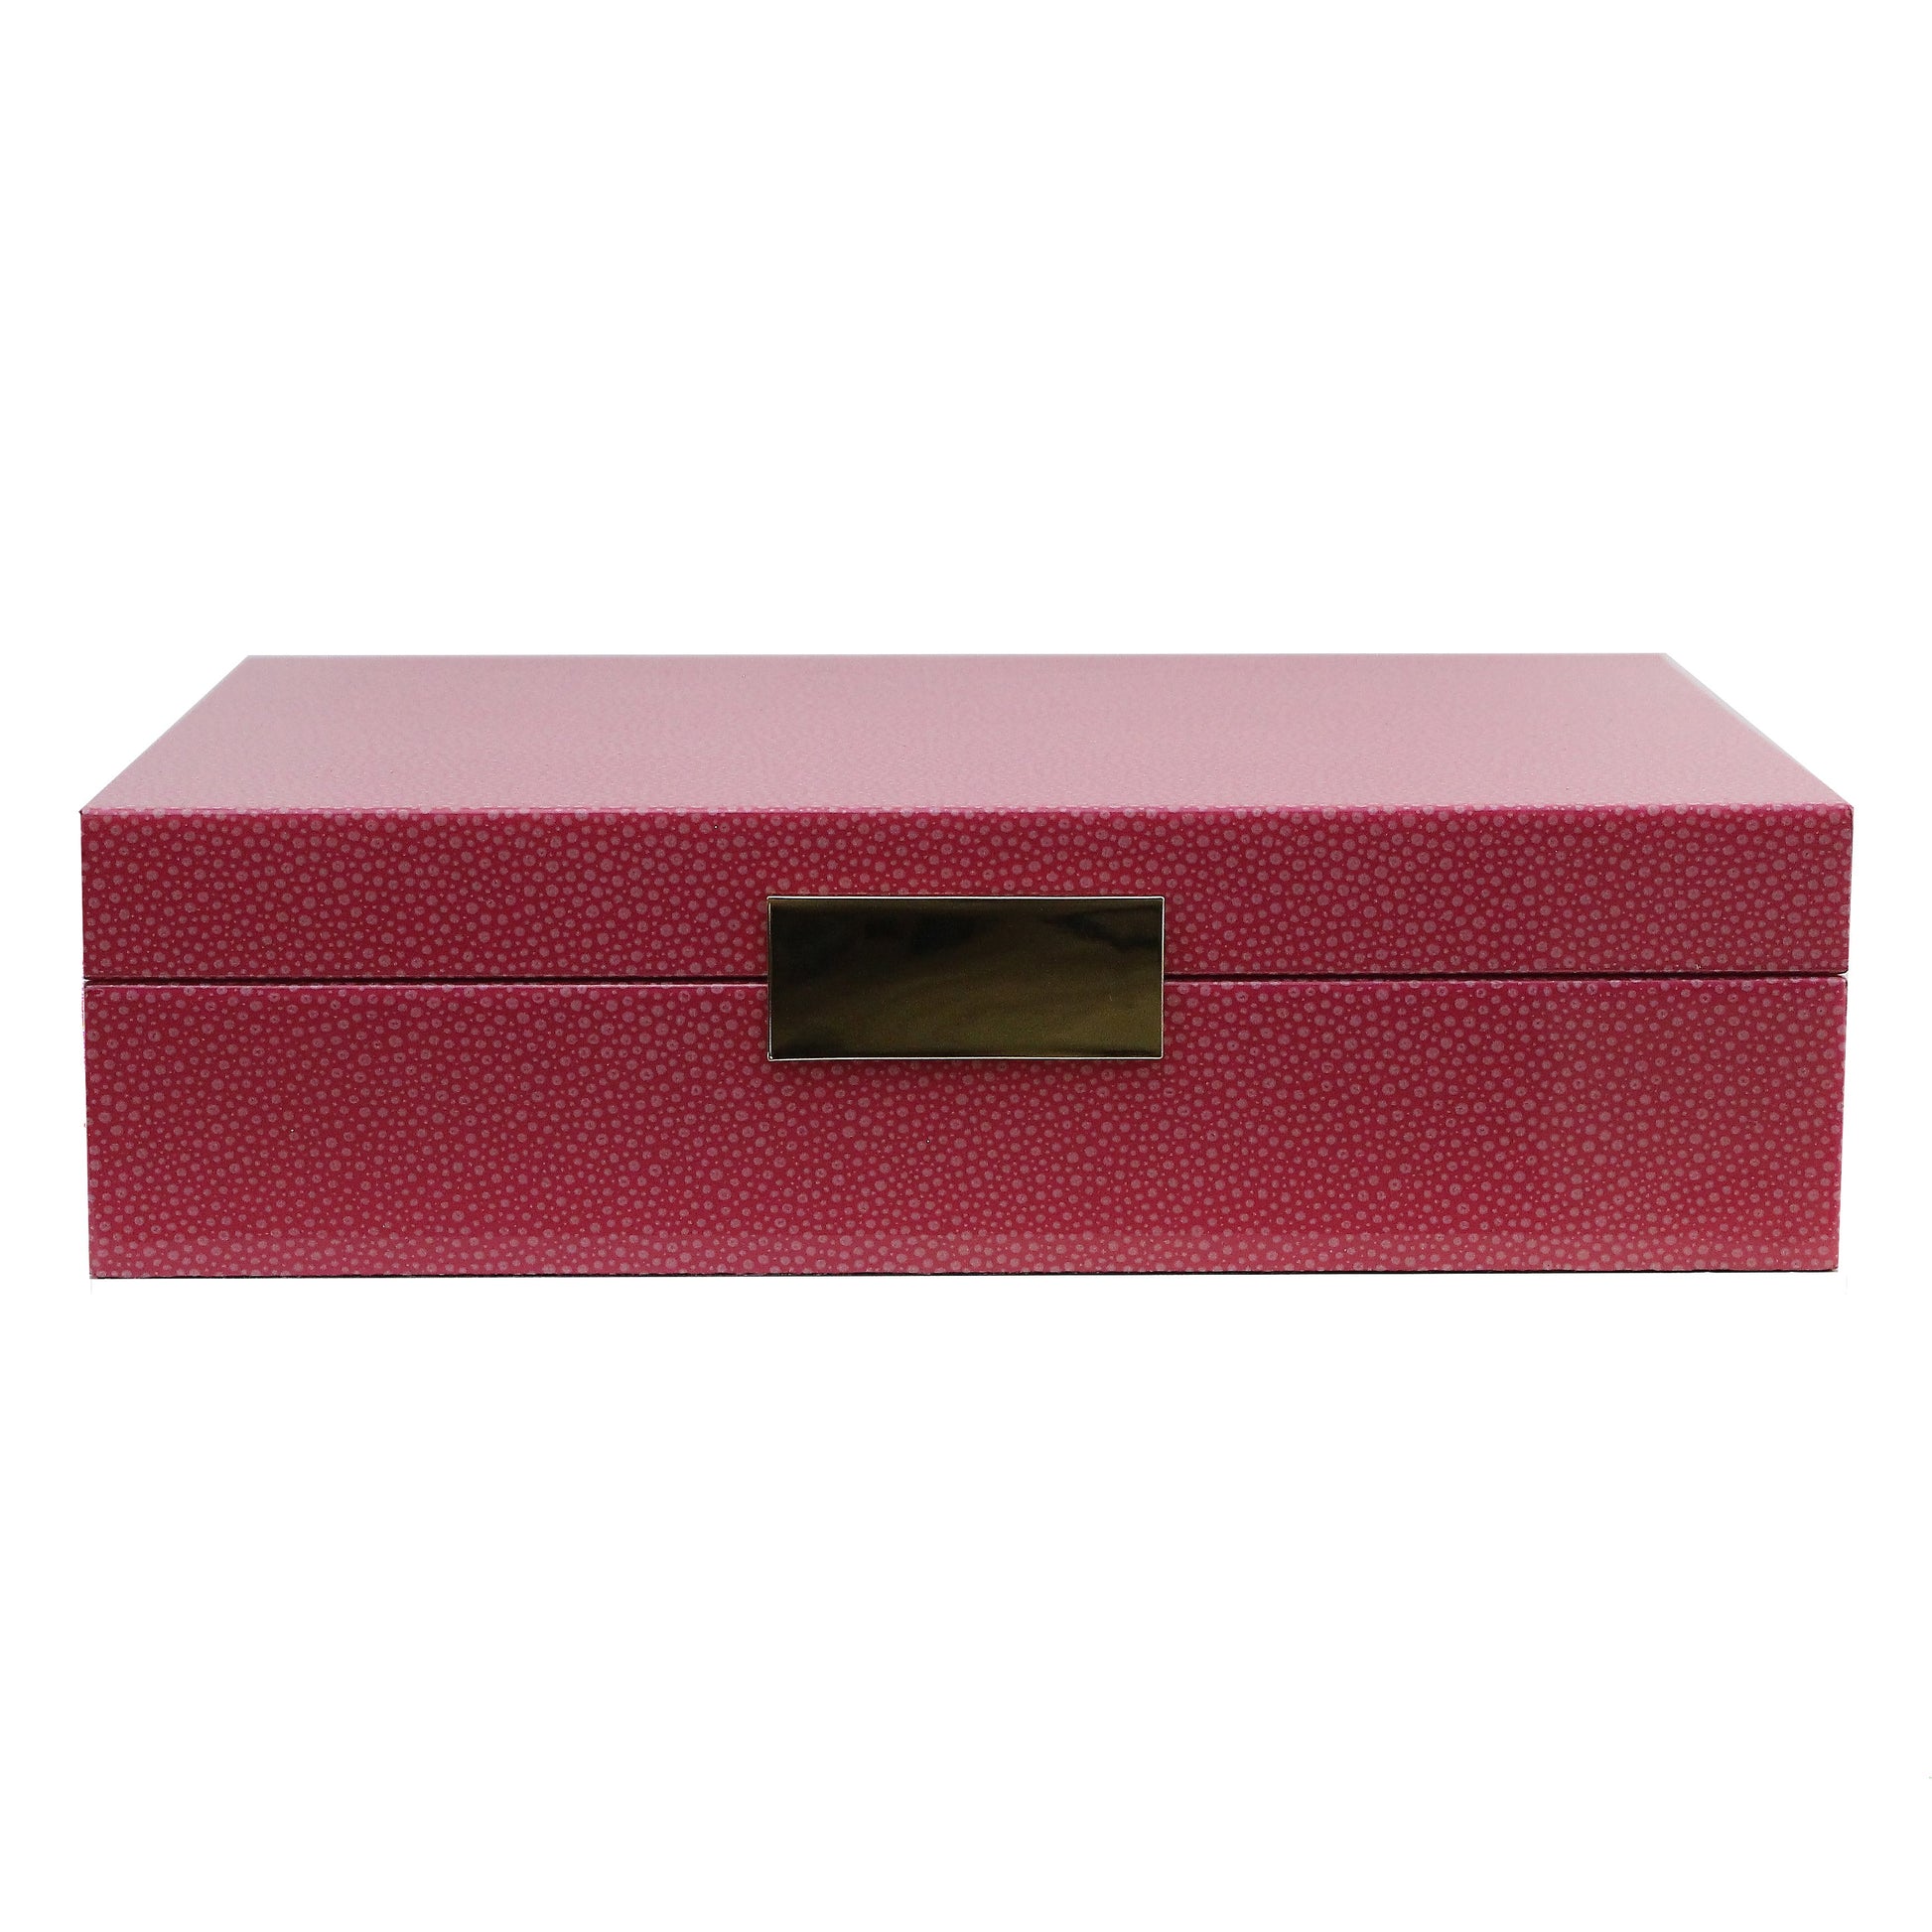 Large pink storage box with gold plated clasp